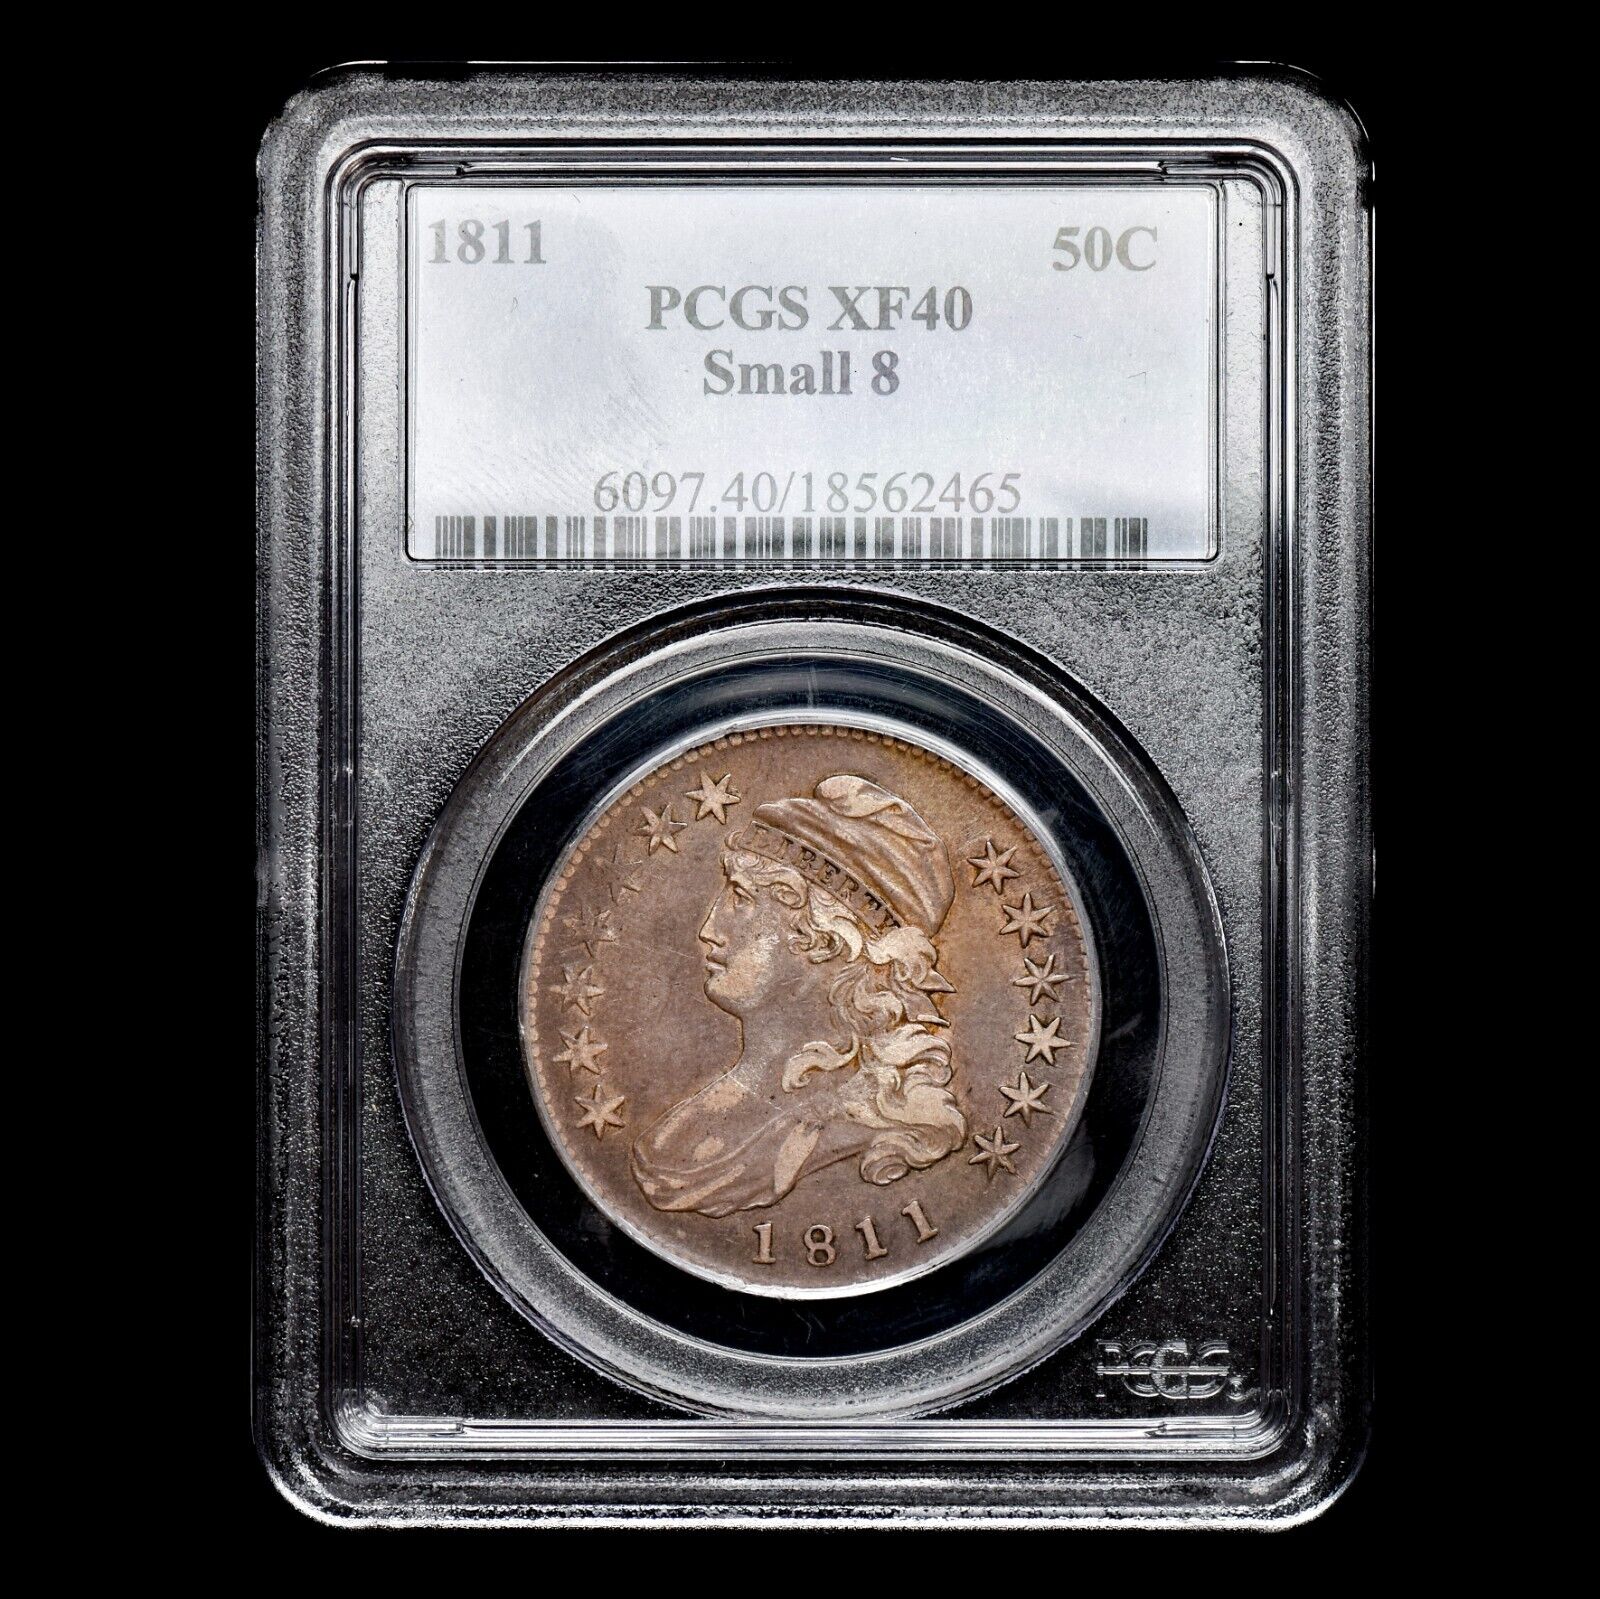 1811 Capped Bust Half Dollar ✪ Pcgs Xf-40 ✪ 50c Silver Small 8 Coin ◢trusted◣